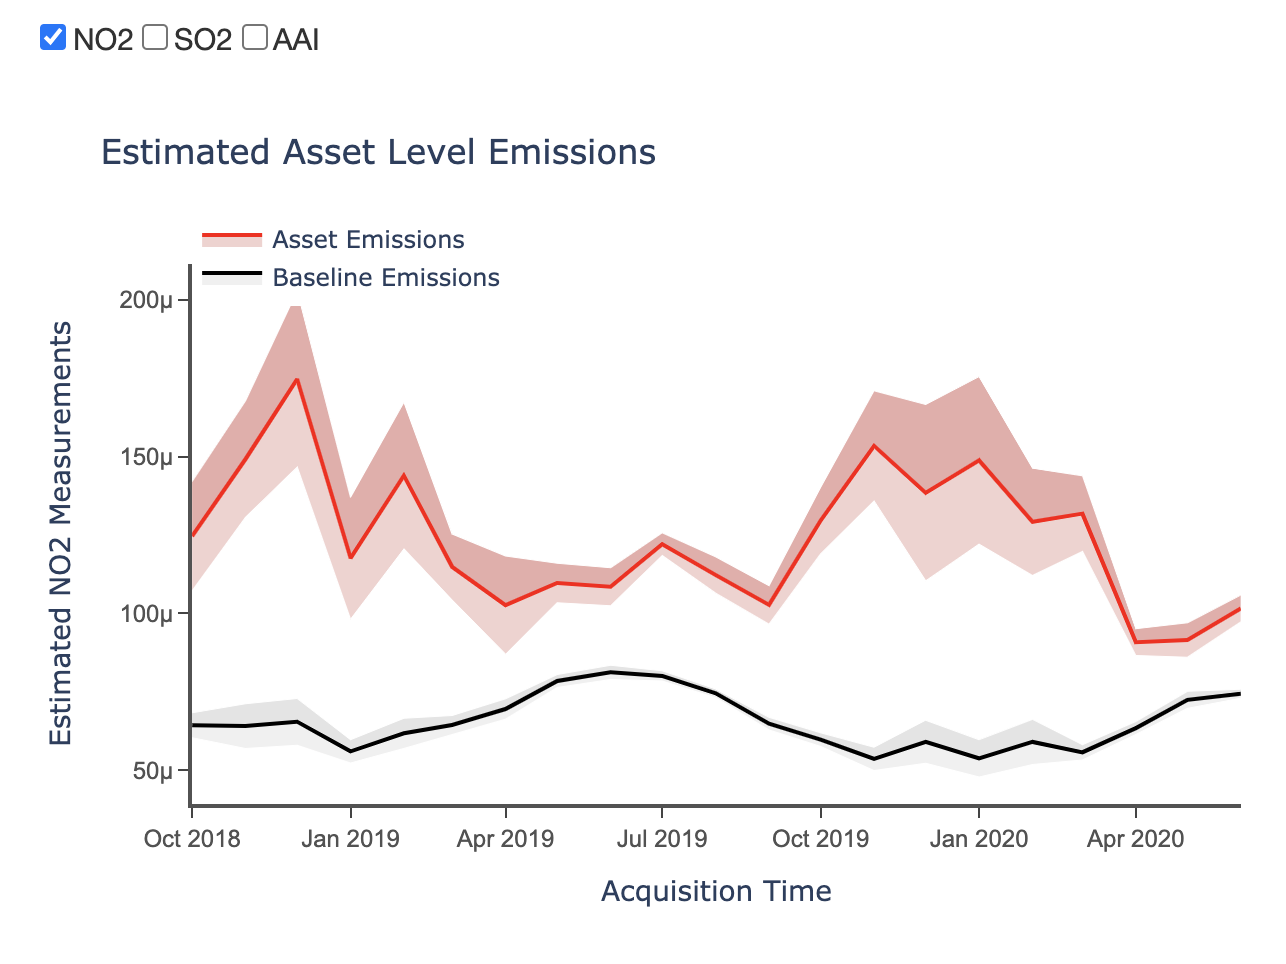 The new service can provide asset emission levels compared with baseline local emissions across time to support decision-making.